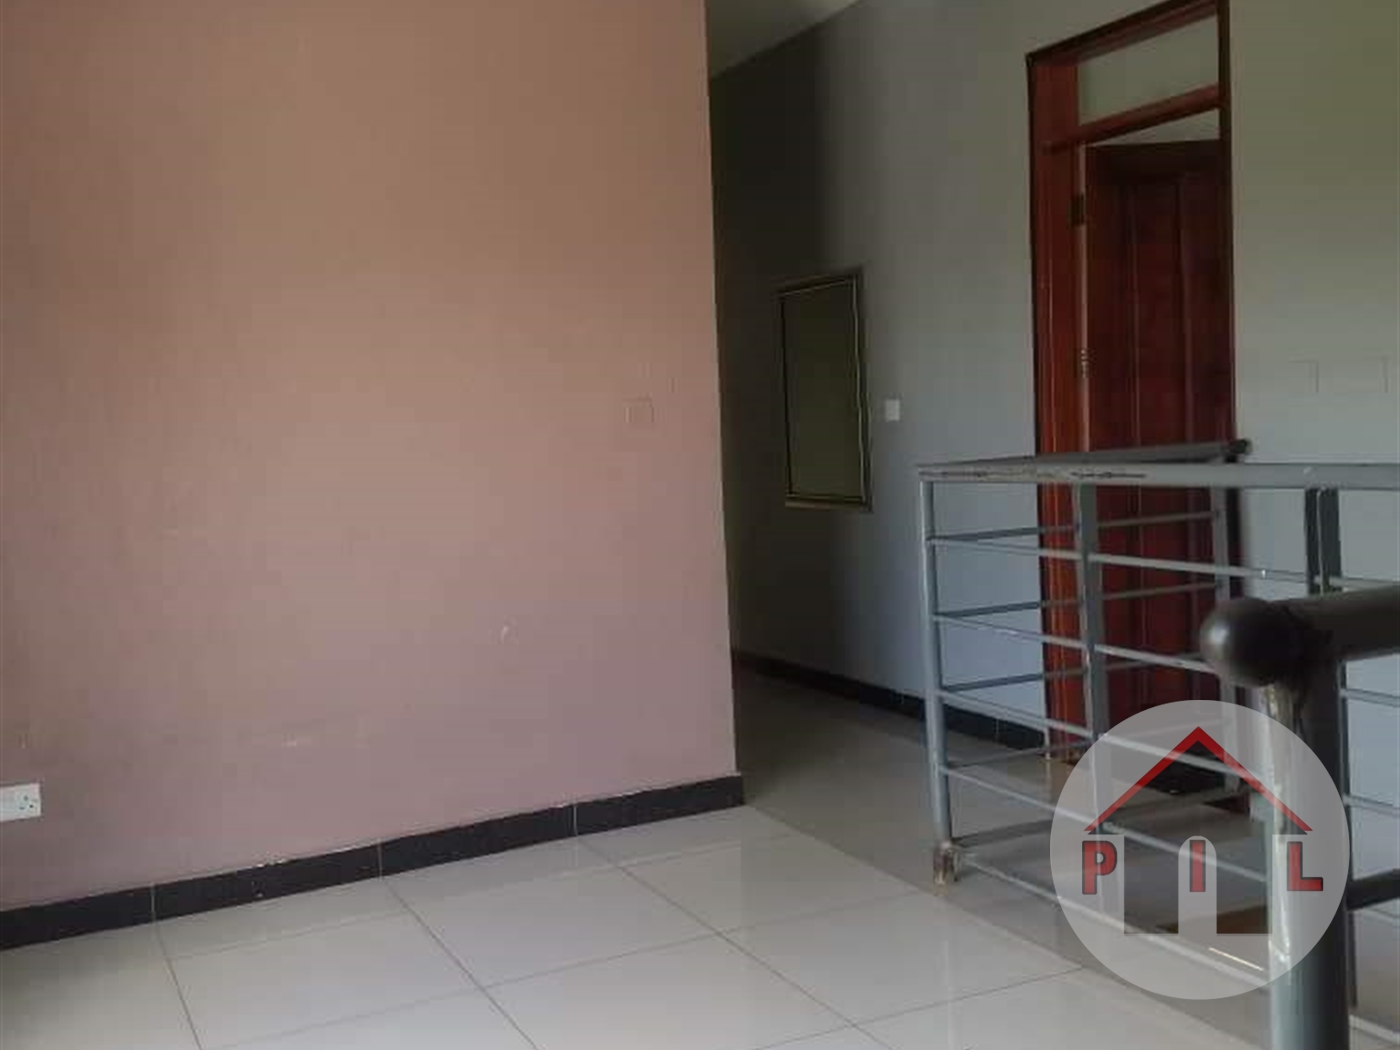 Town House for sale in Kyanja Kampala